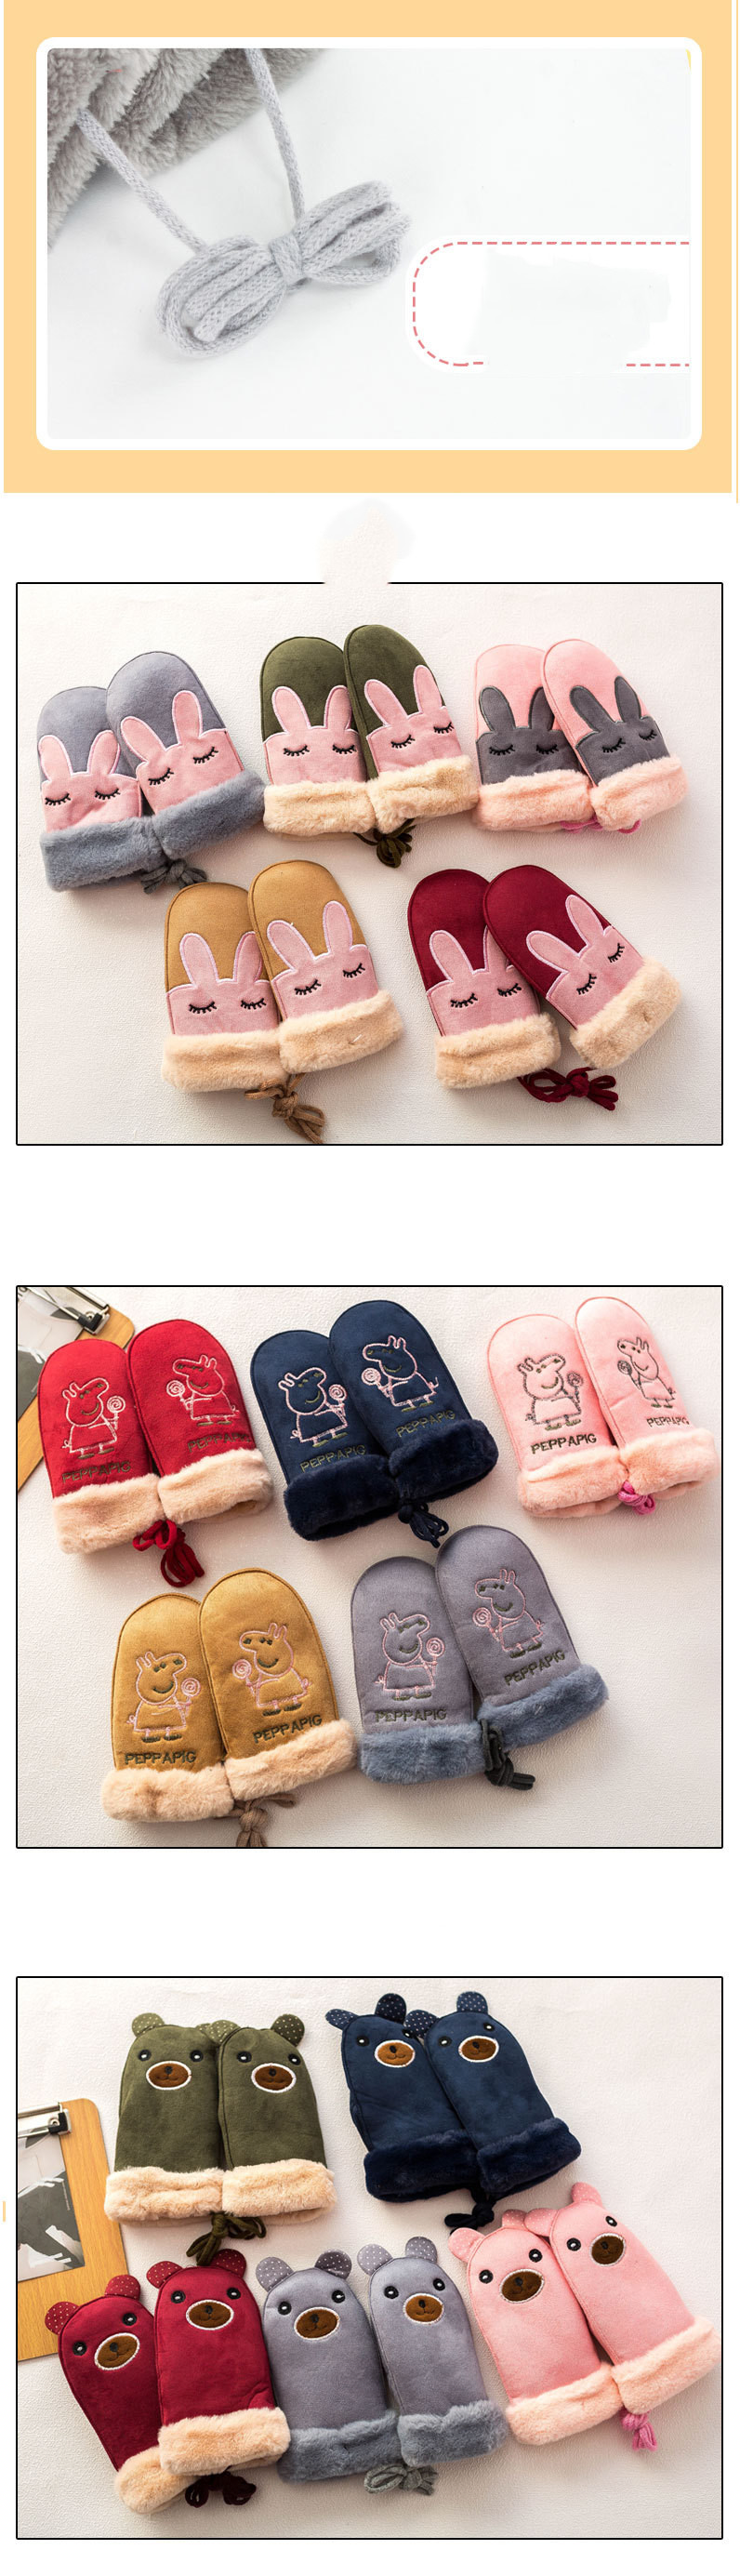 Winter cartoon suede gloves for boys and girls (3)